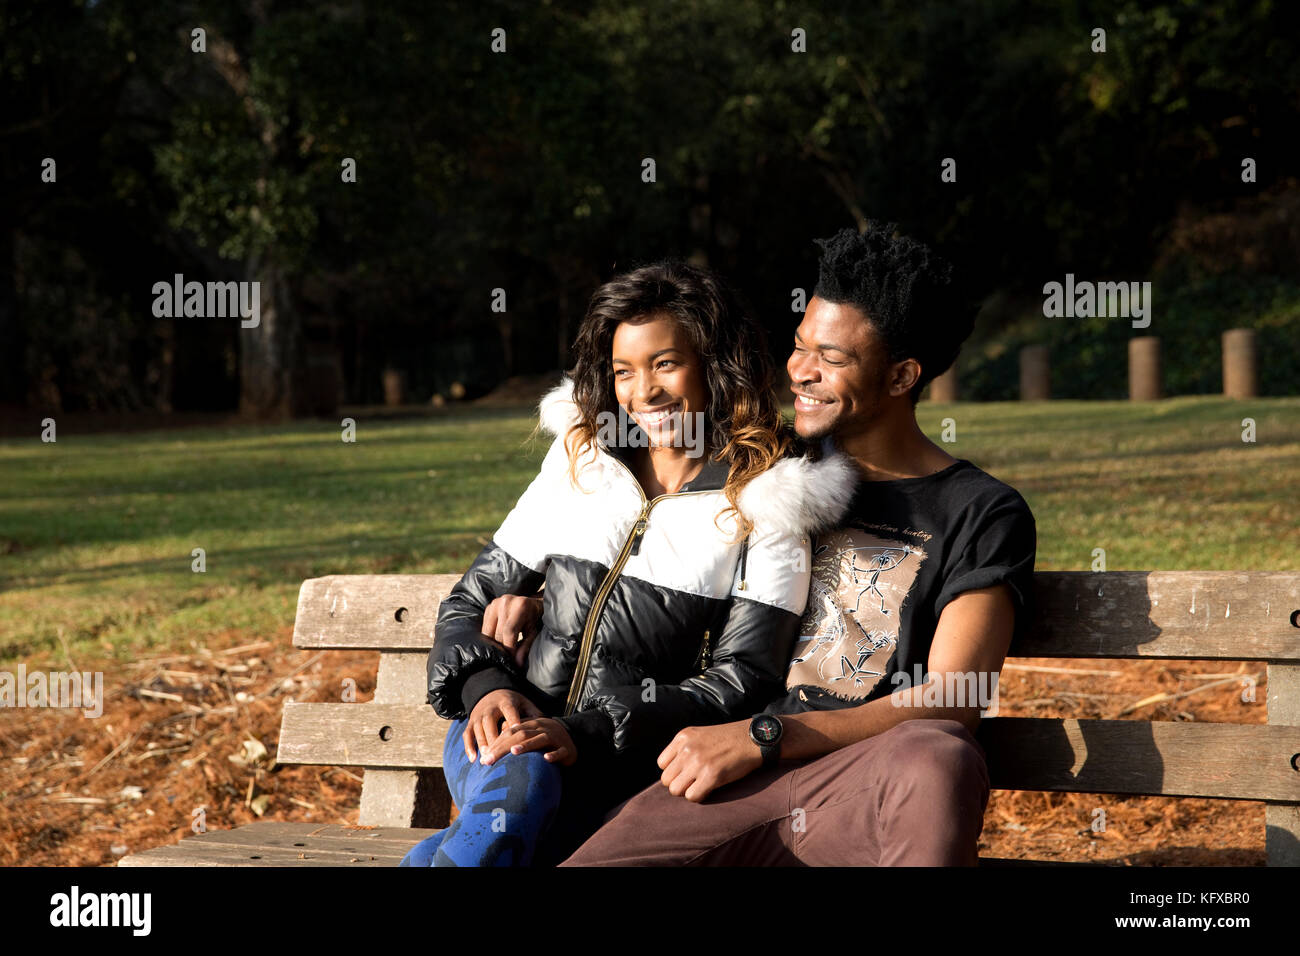 Couple on a park bench Stock Photo